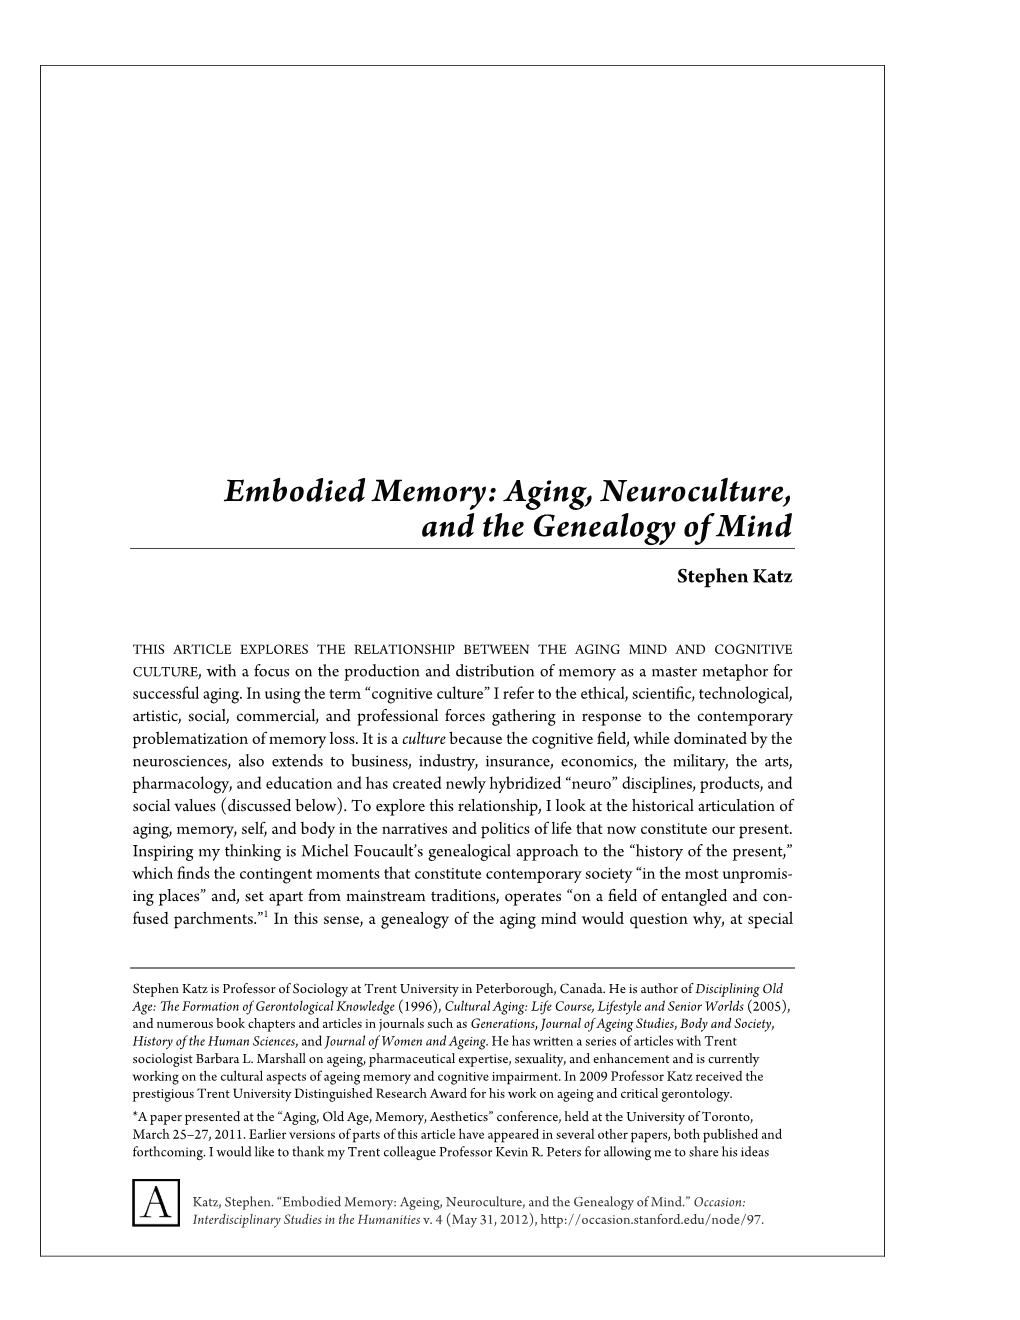 Embodied Memory: Aging, Neuroculture, and the Genealogy of Mind Stephen Katz